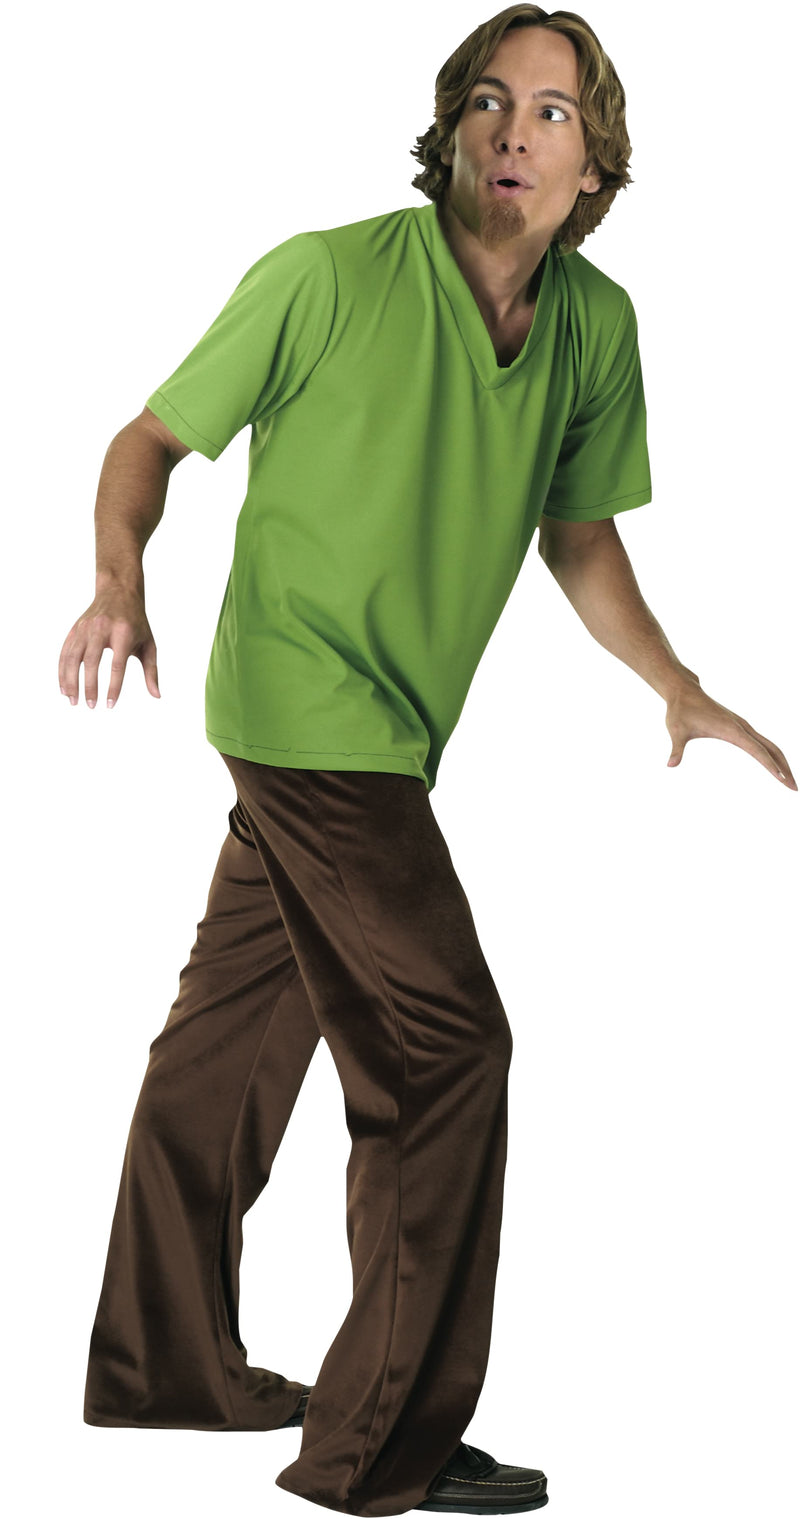 Shaggy Deluxe Costume Adult